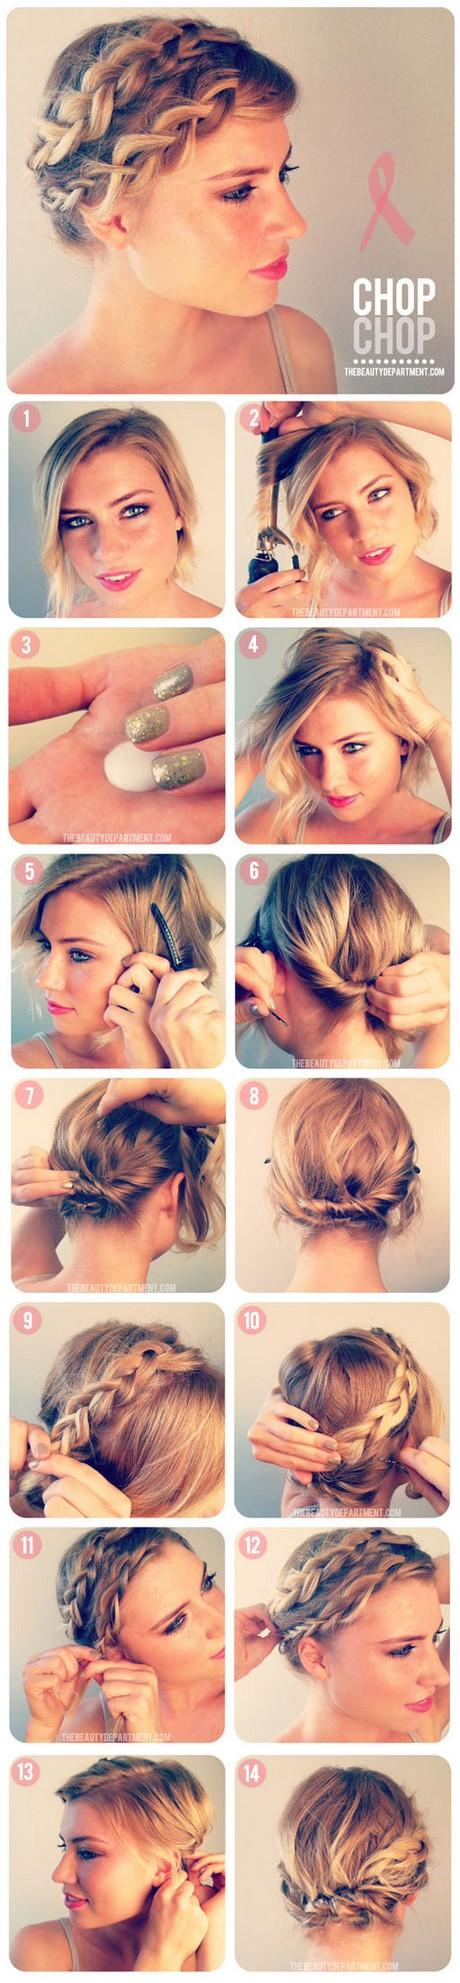 Easy braided hairstyles for short hair easy-braided-hairstyles-for-short-hair-14_15